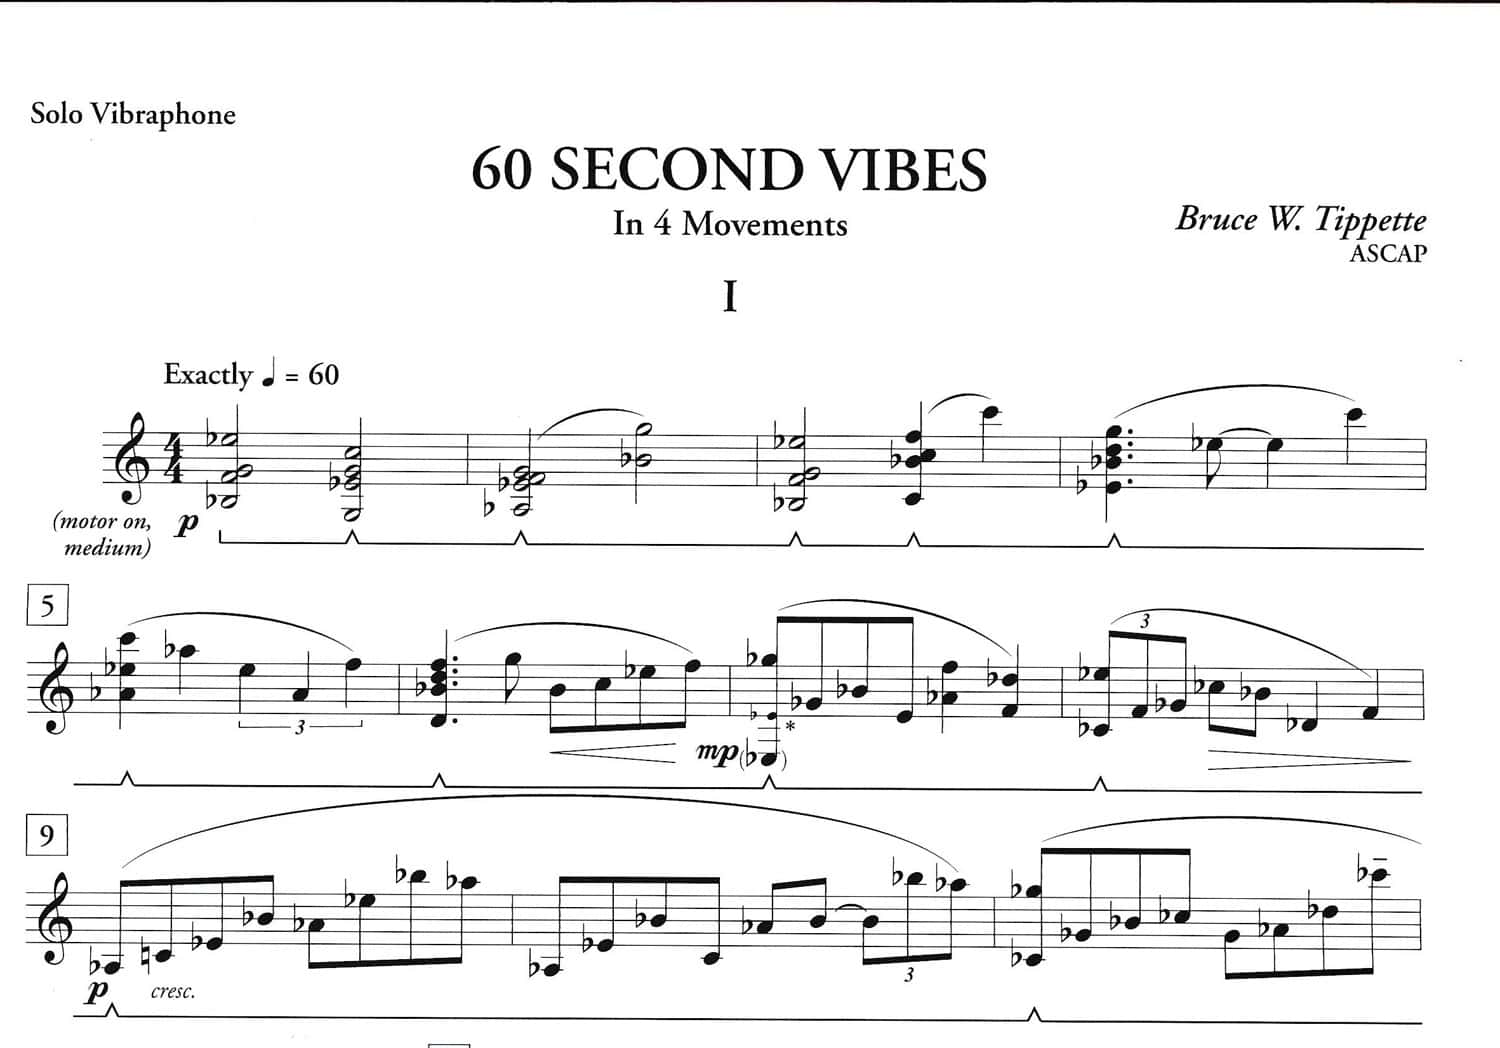 60 Second Vibes by Bruce Tippette